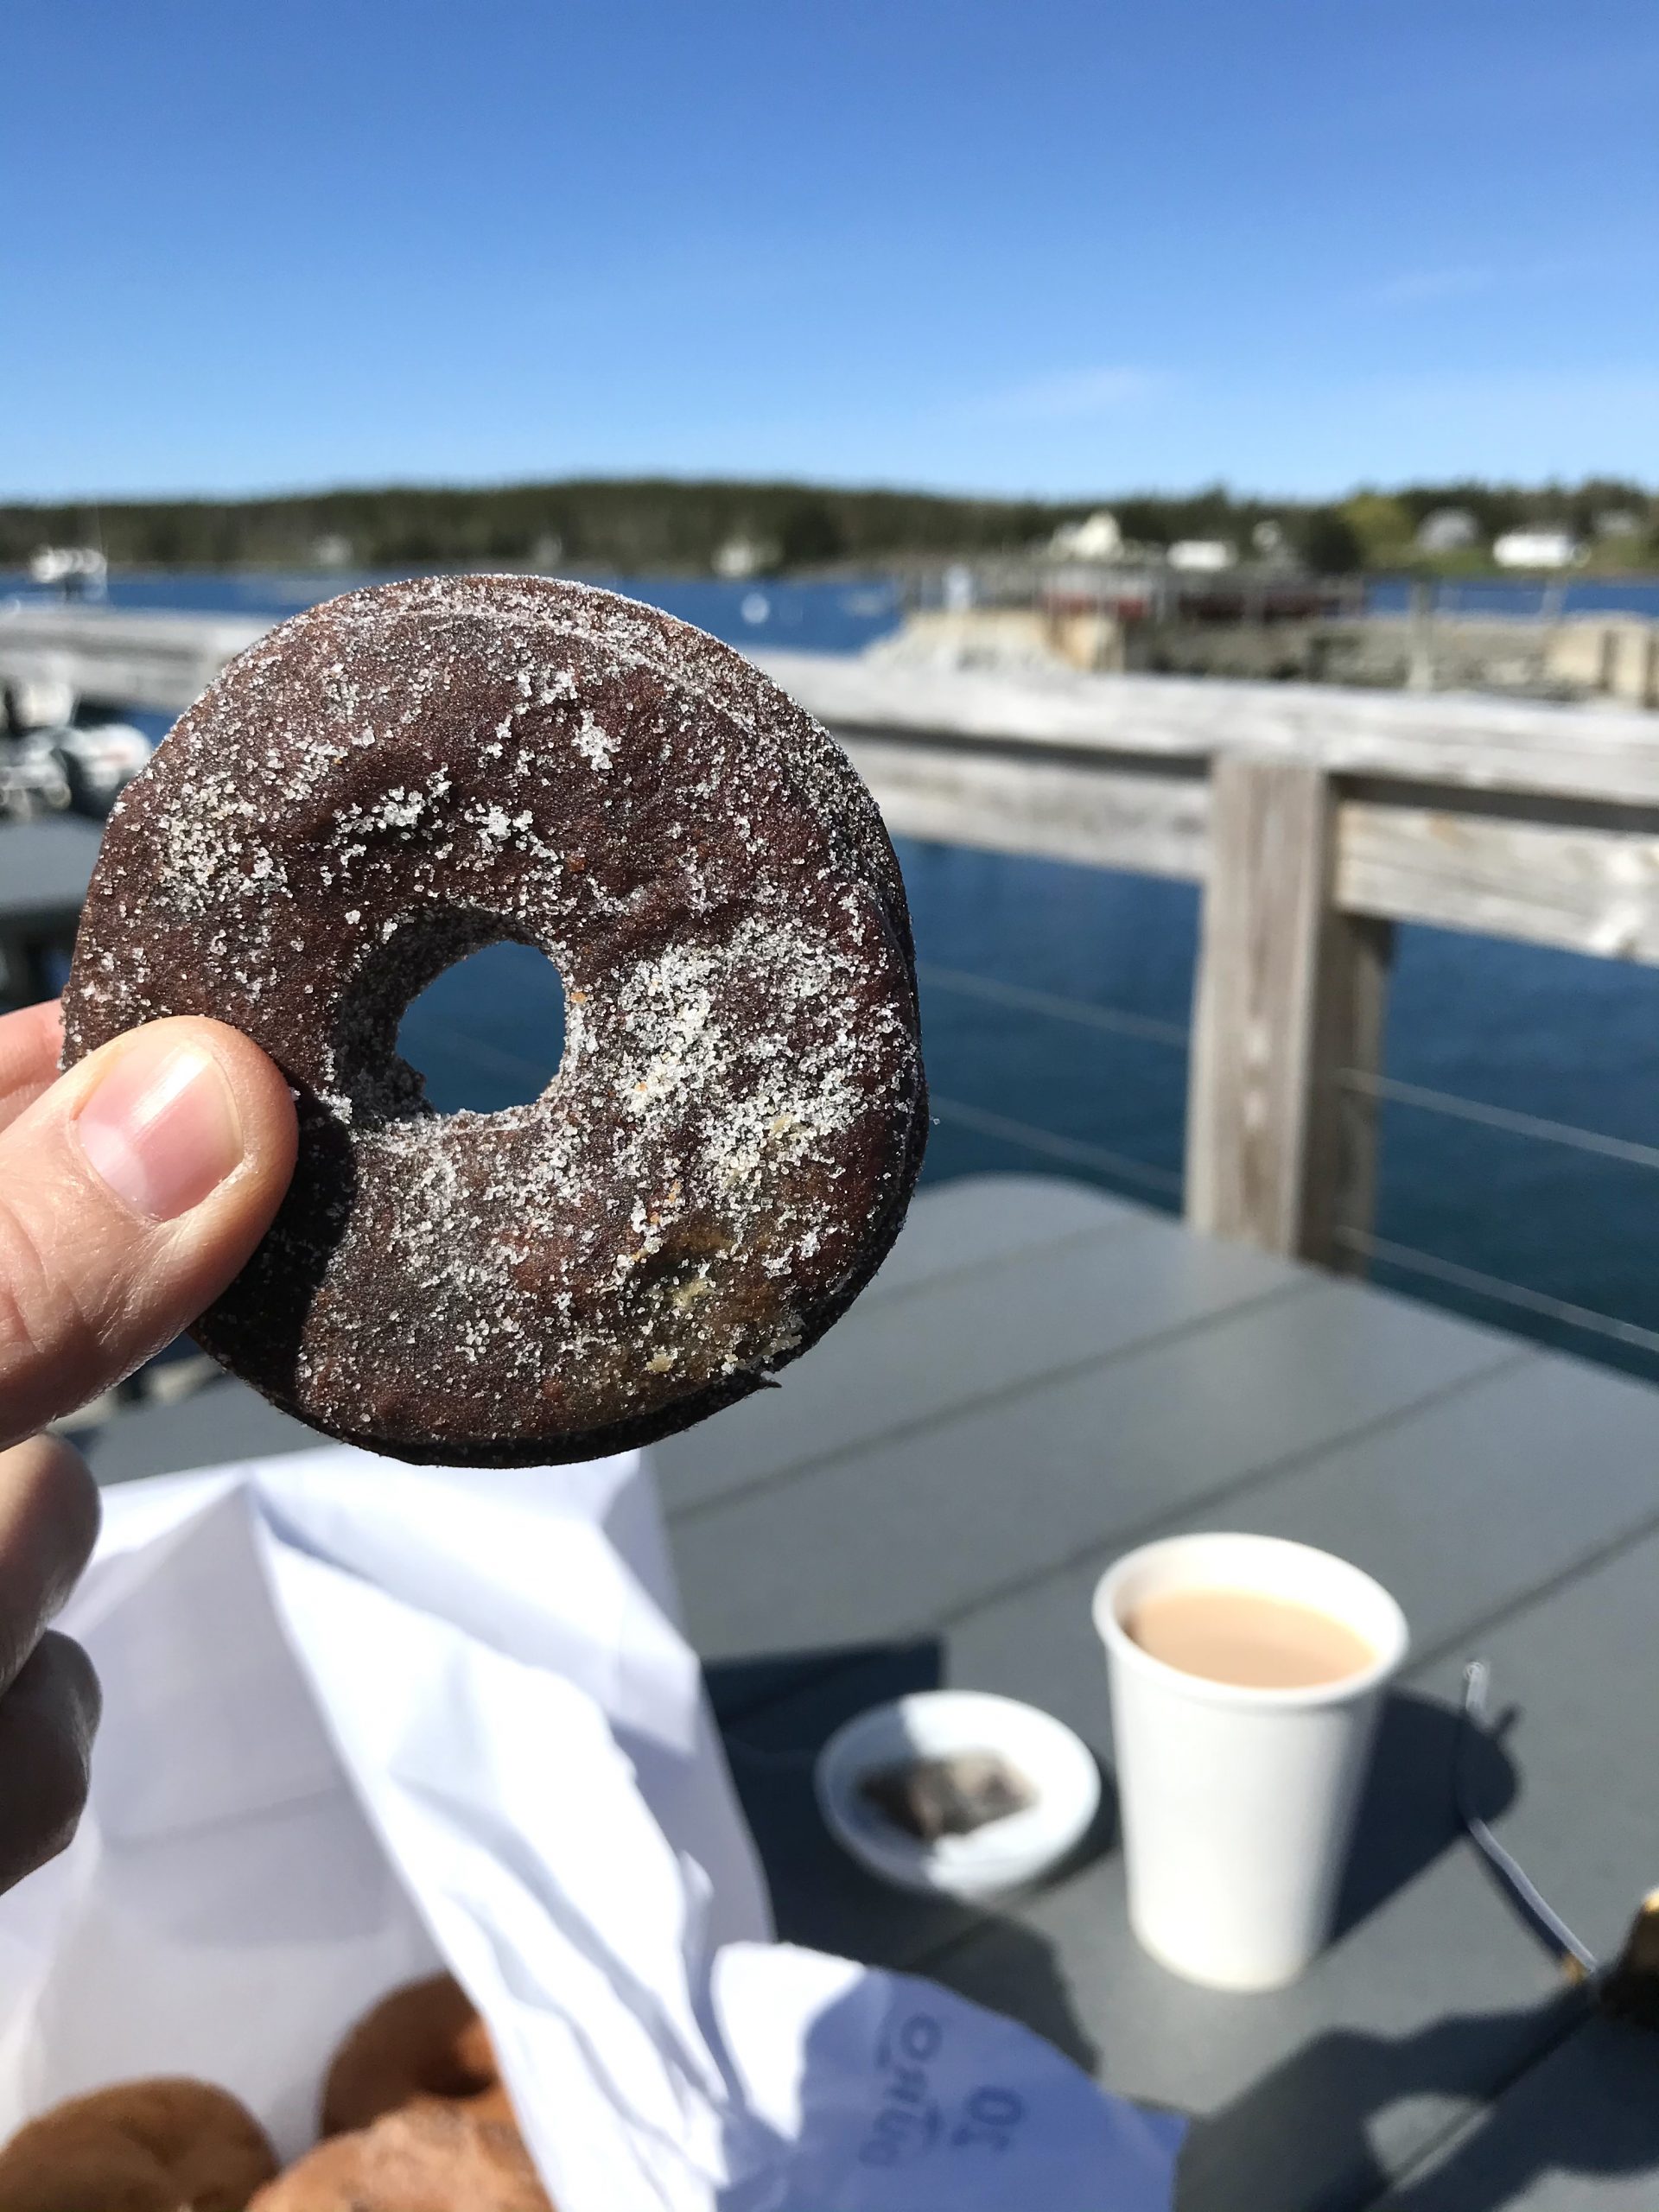 Friday is Doughnut Day at The Village Ice Cream & Port Clyde Bakery